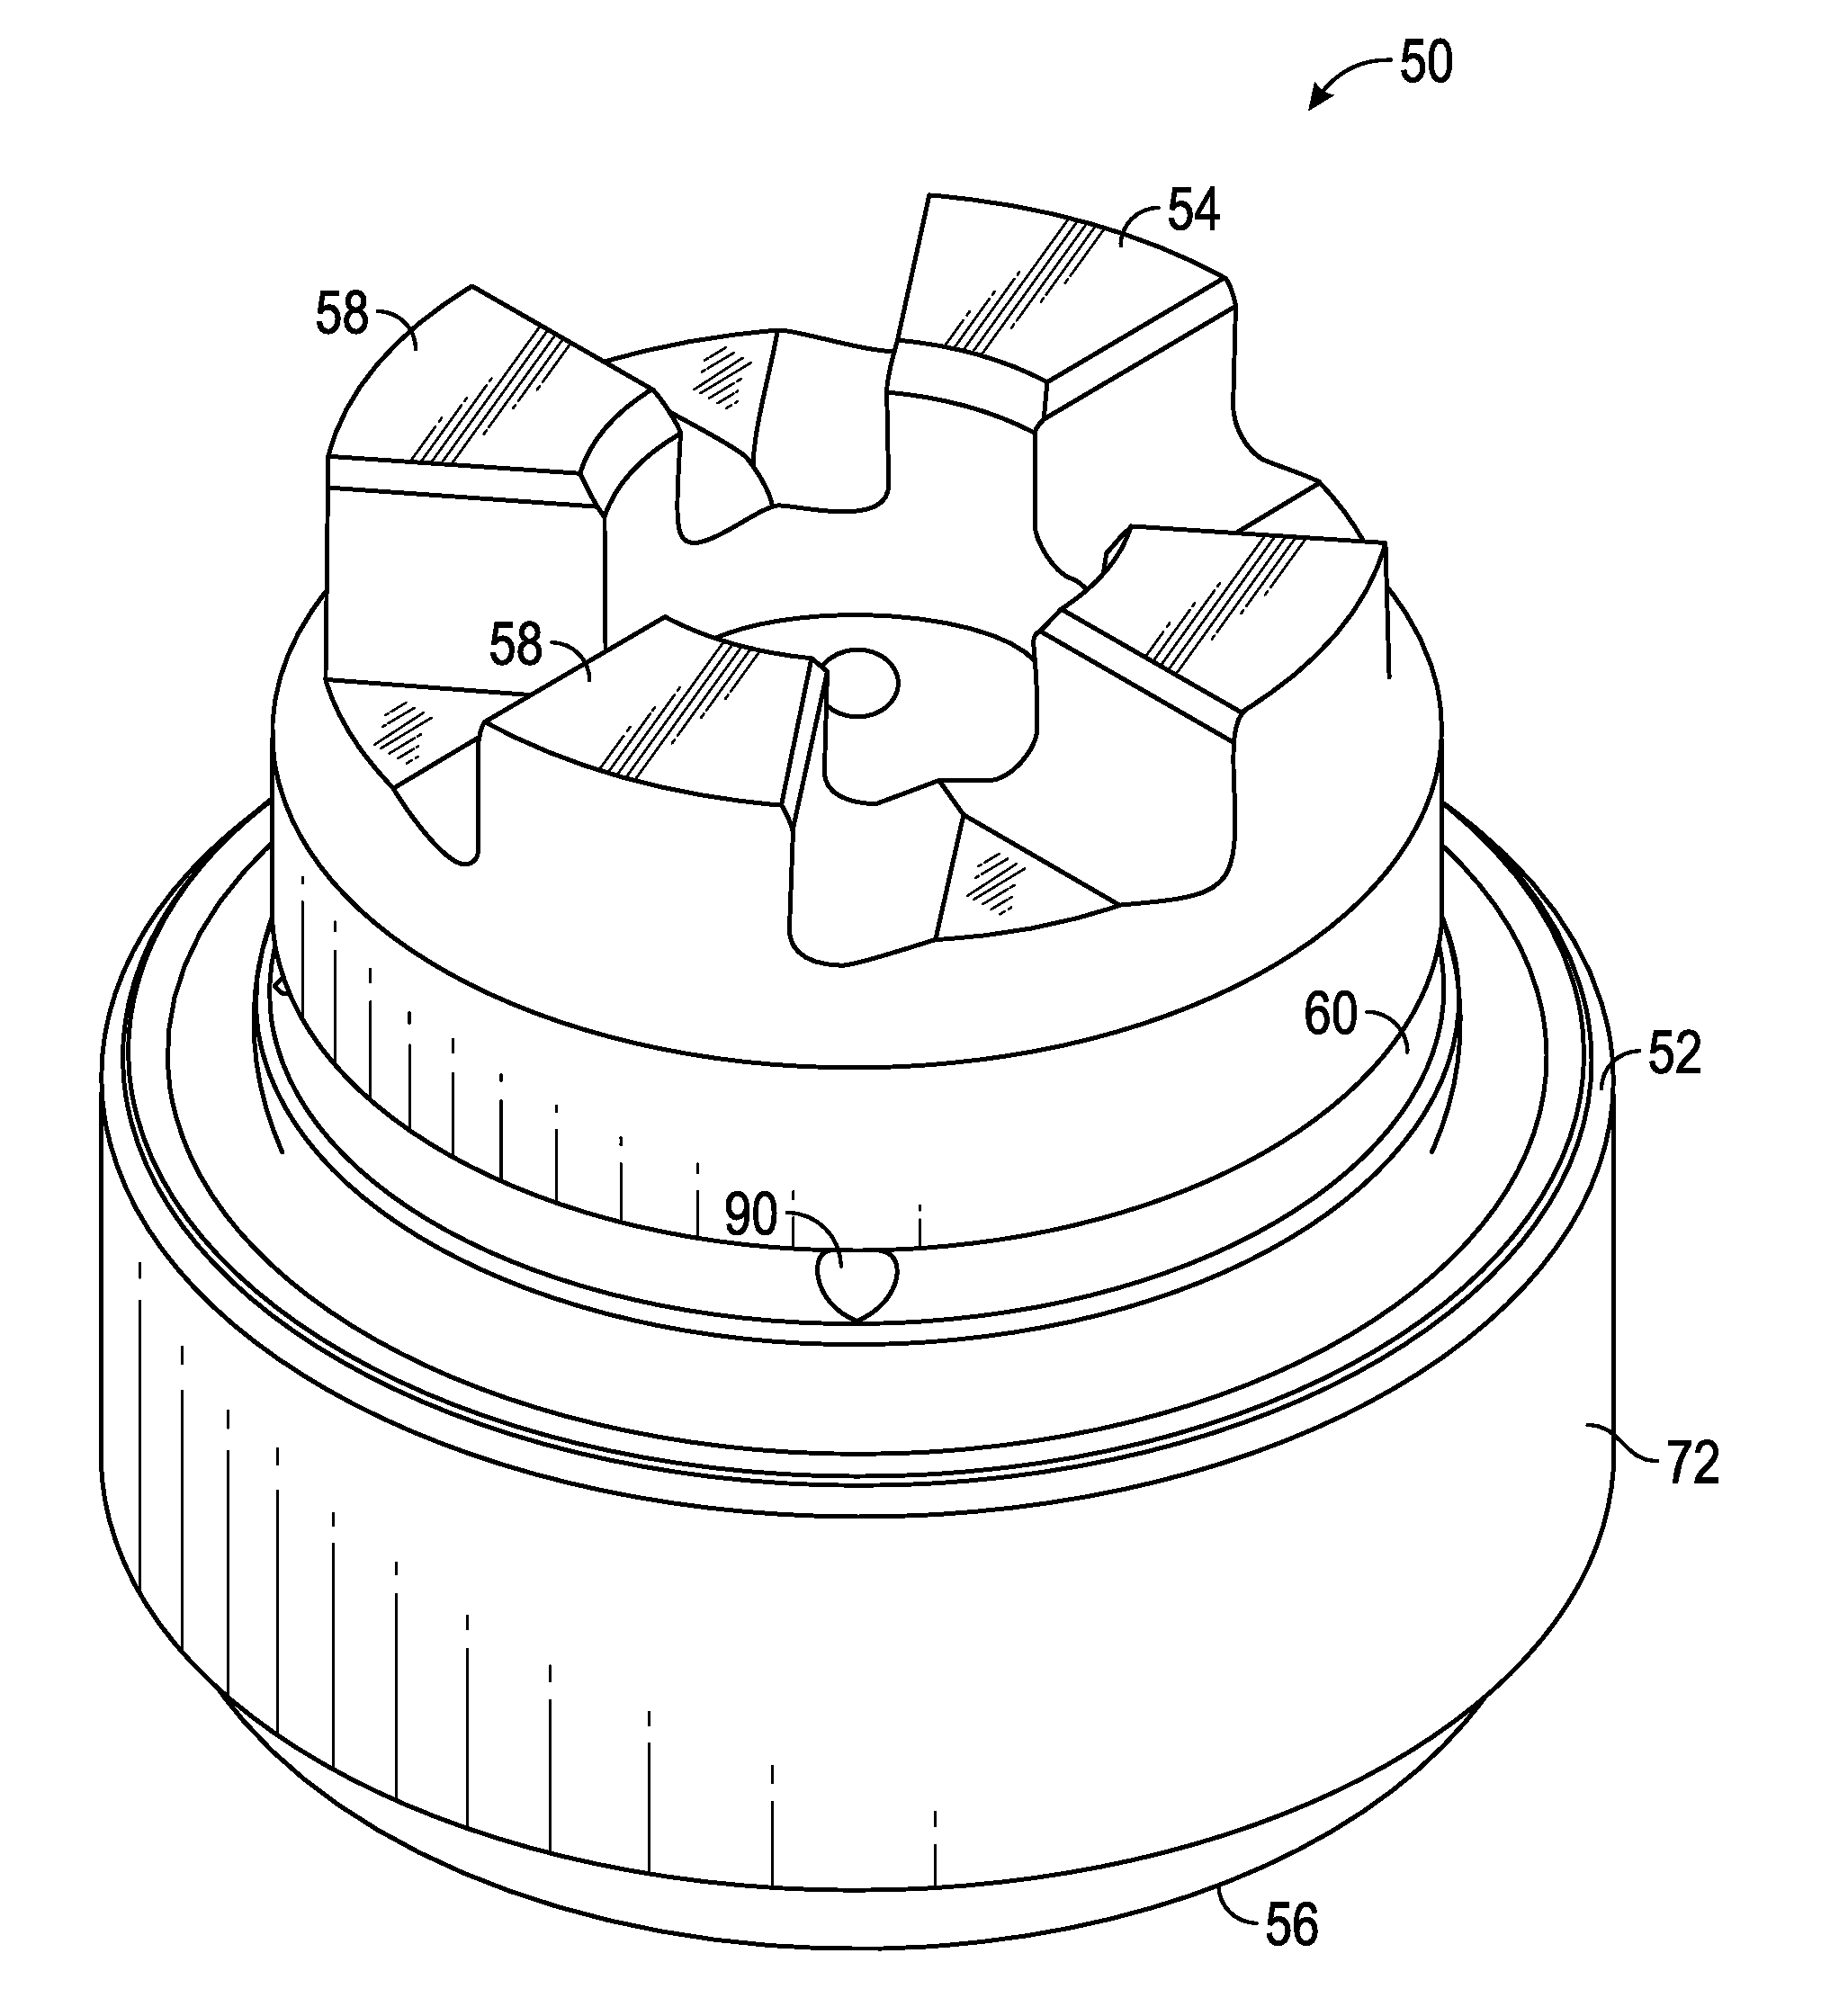 Disconnect shaft for an integrated drive generator (IDG)